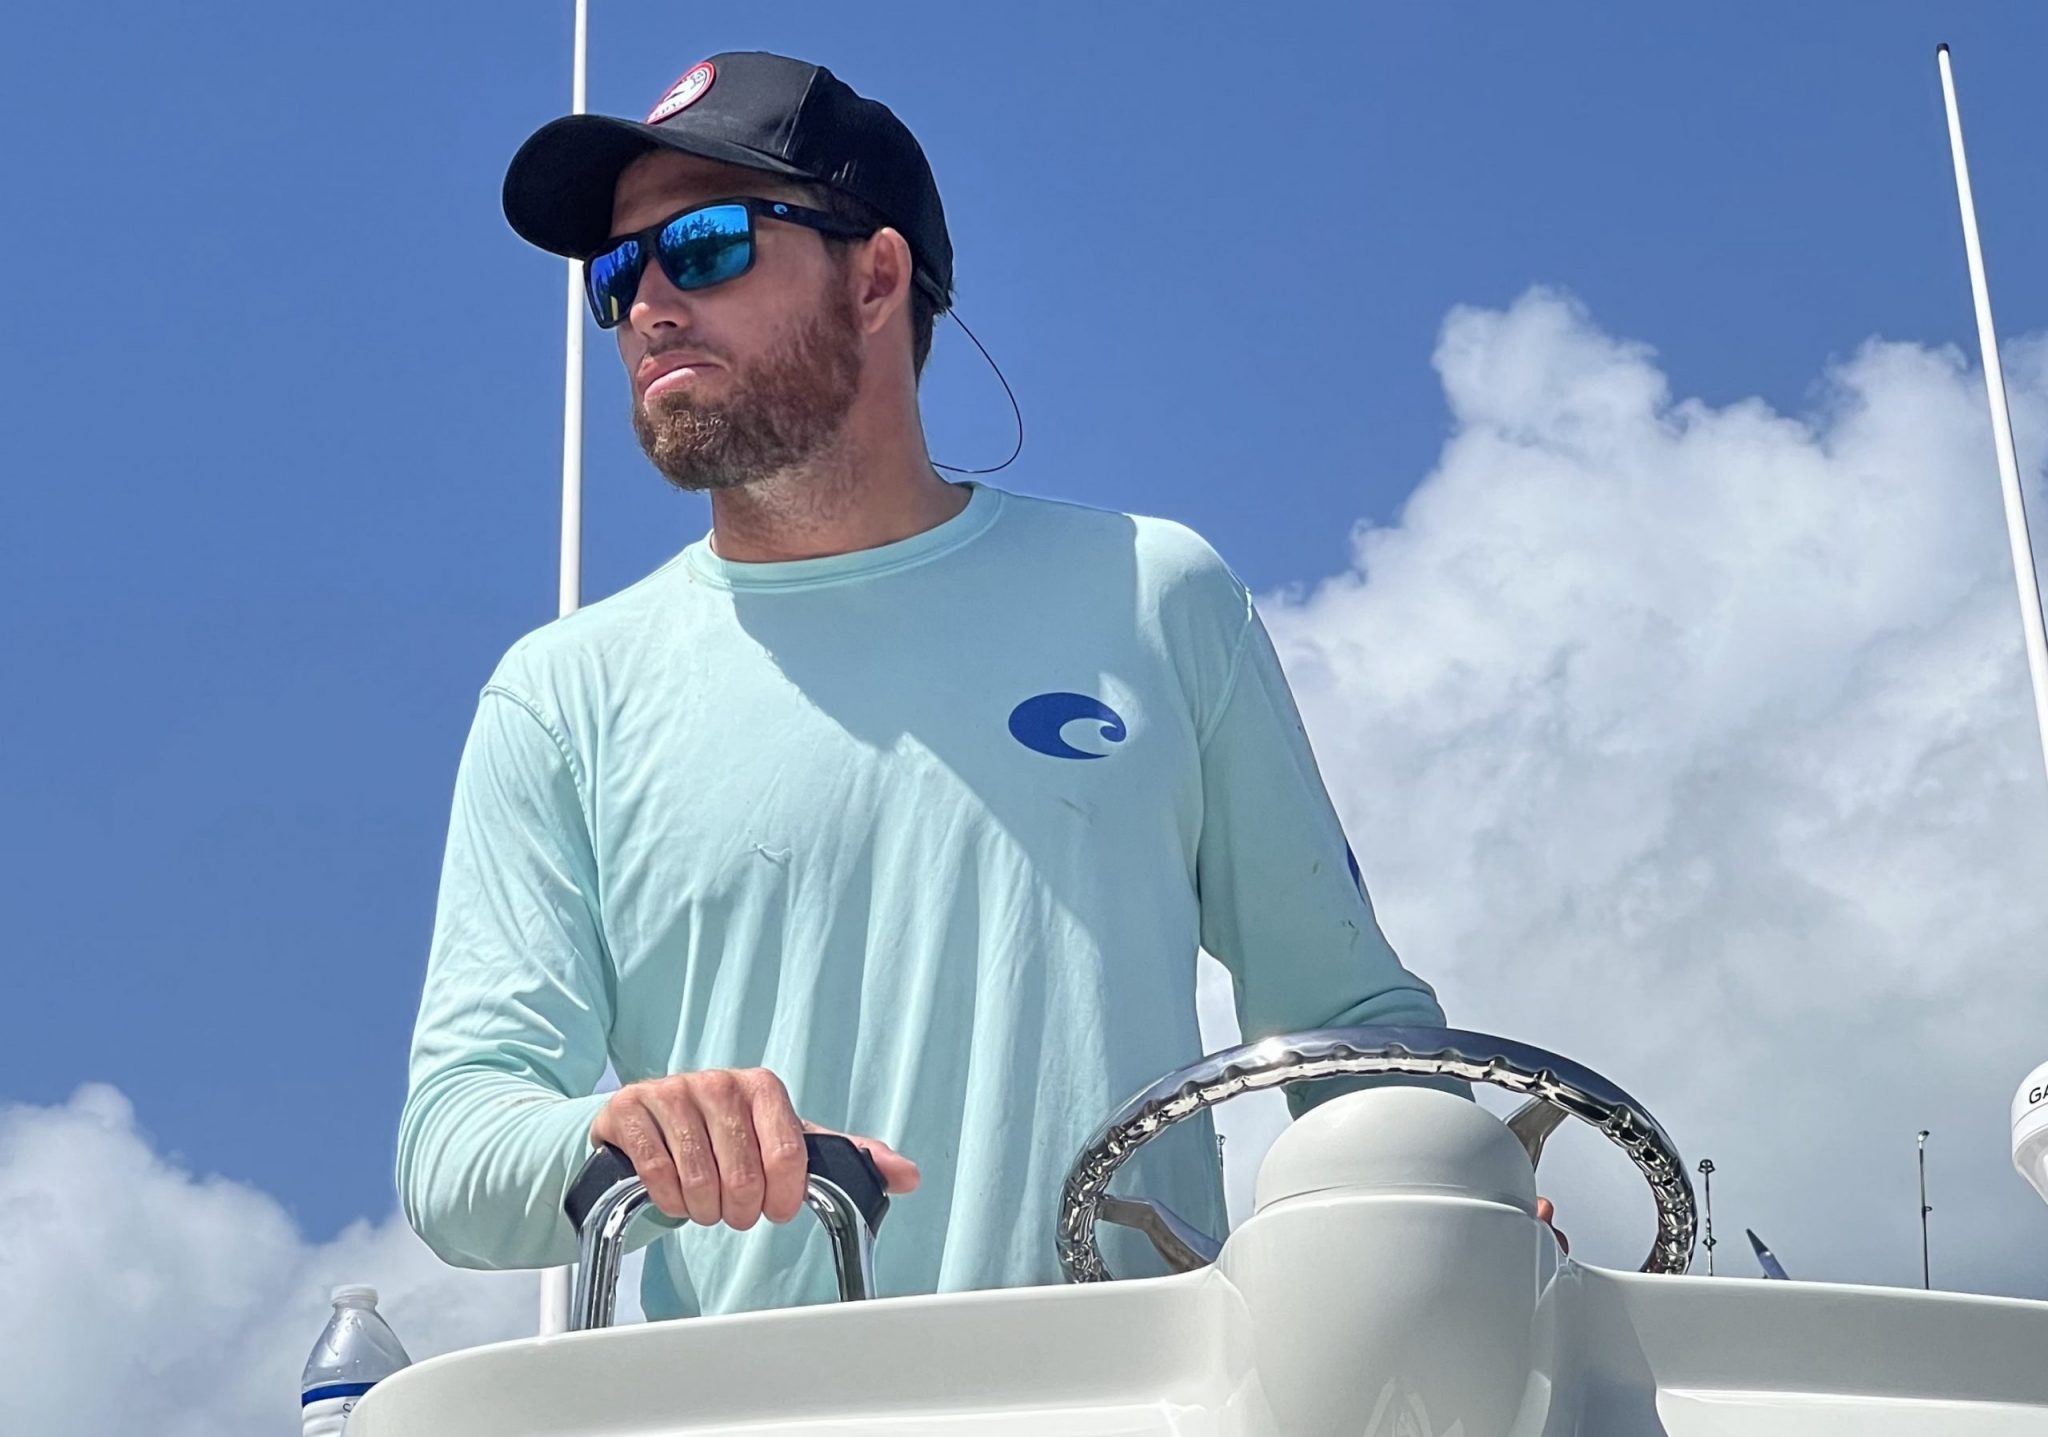 A confident and experienced charter captain standing on a fishing boat, ready to lead a successful fishing expedition.